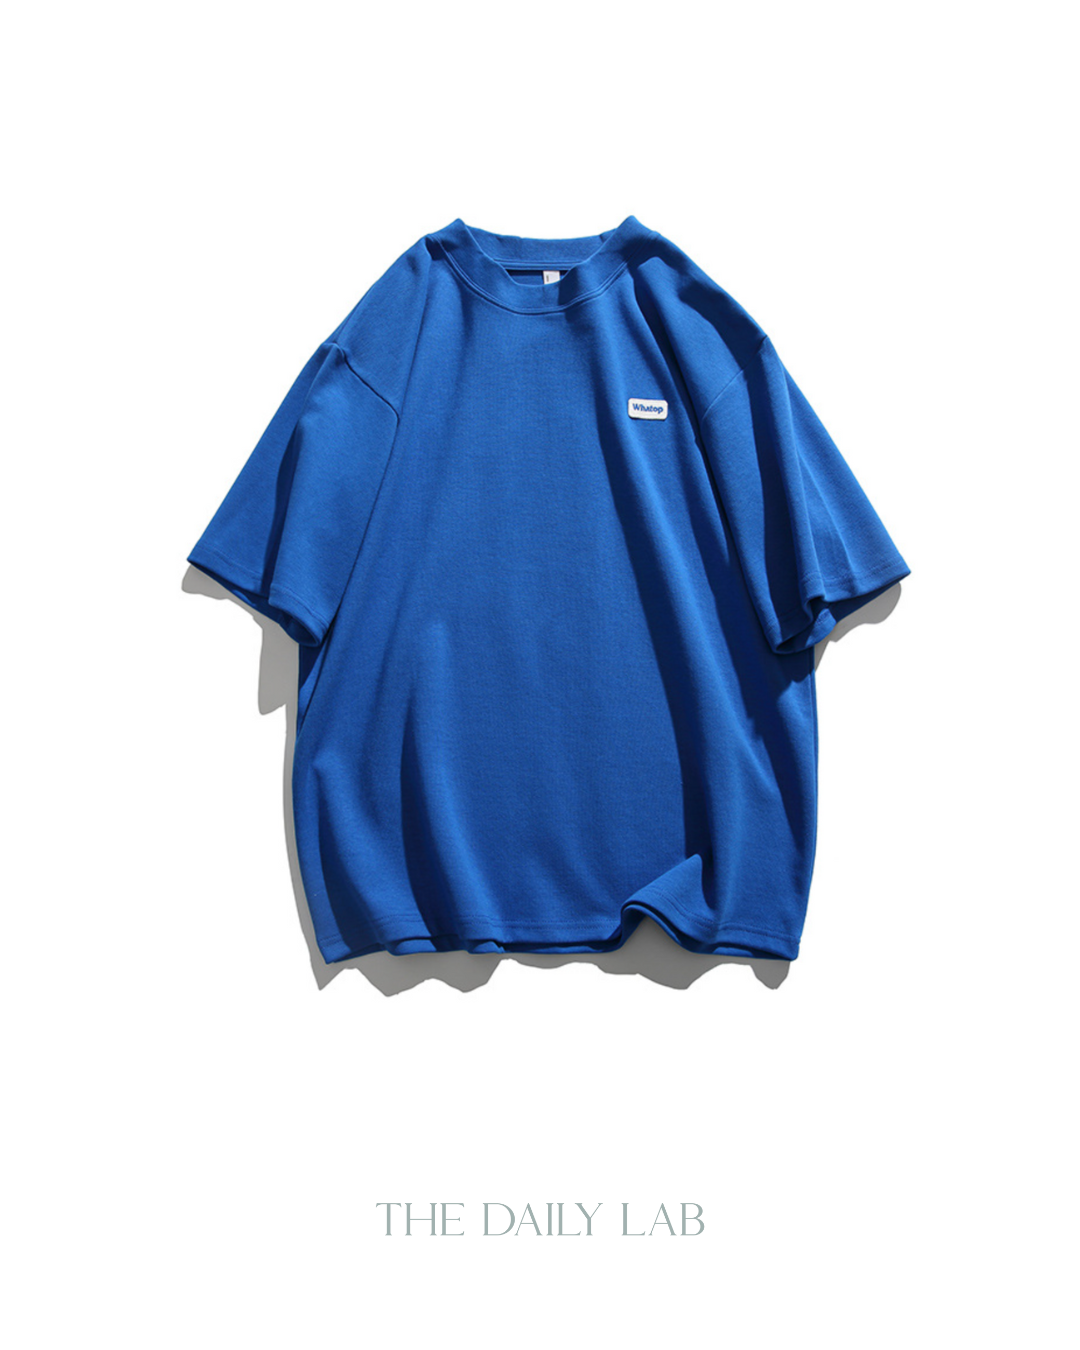 Whatop Oversized Tee in Blue (Size M)